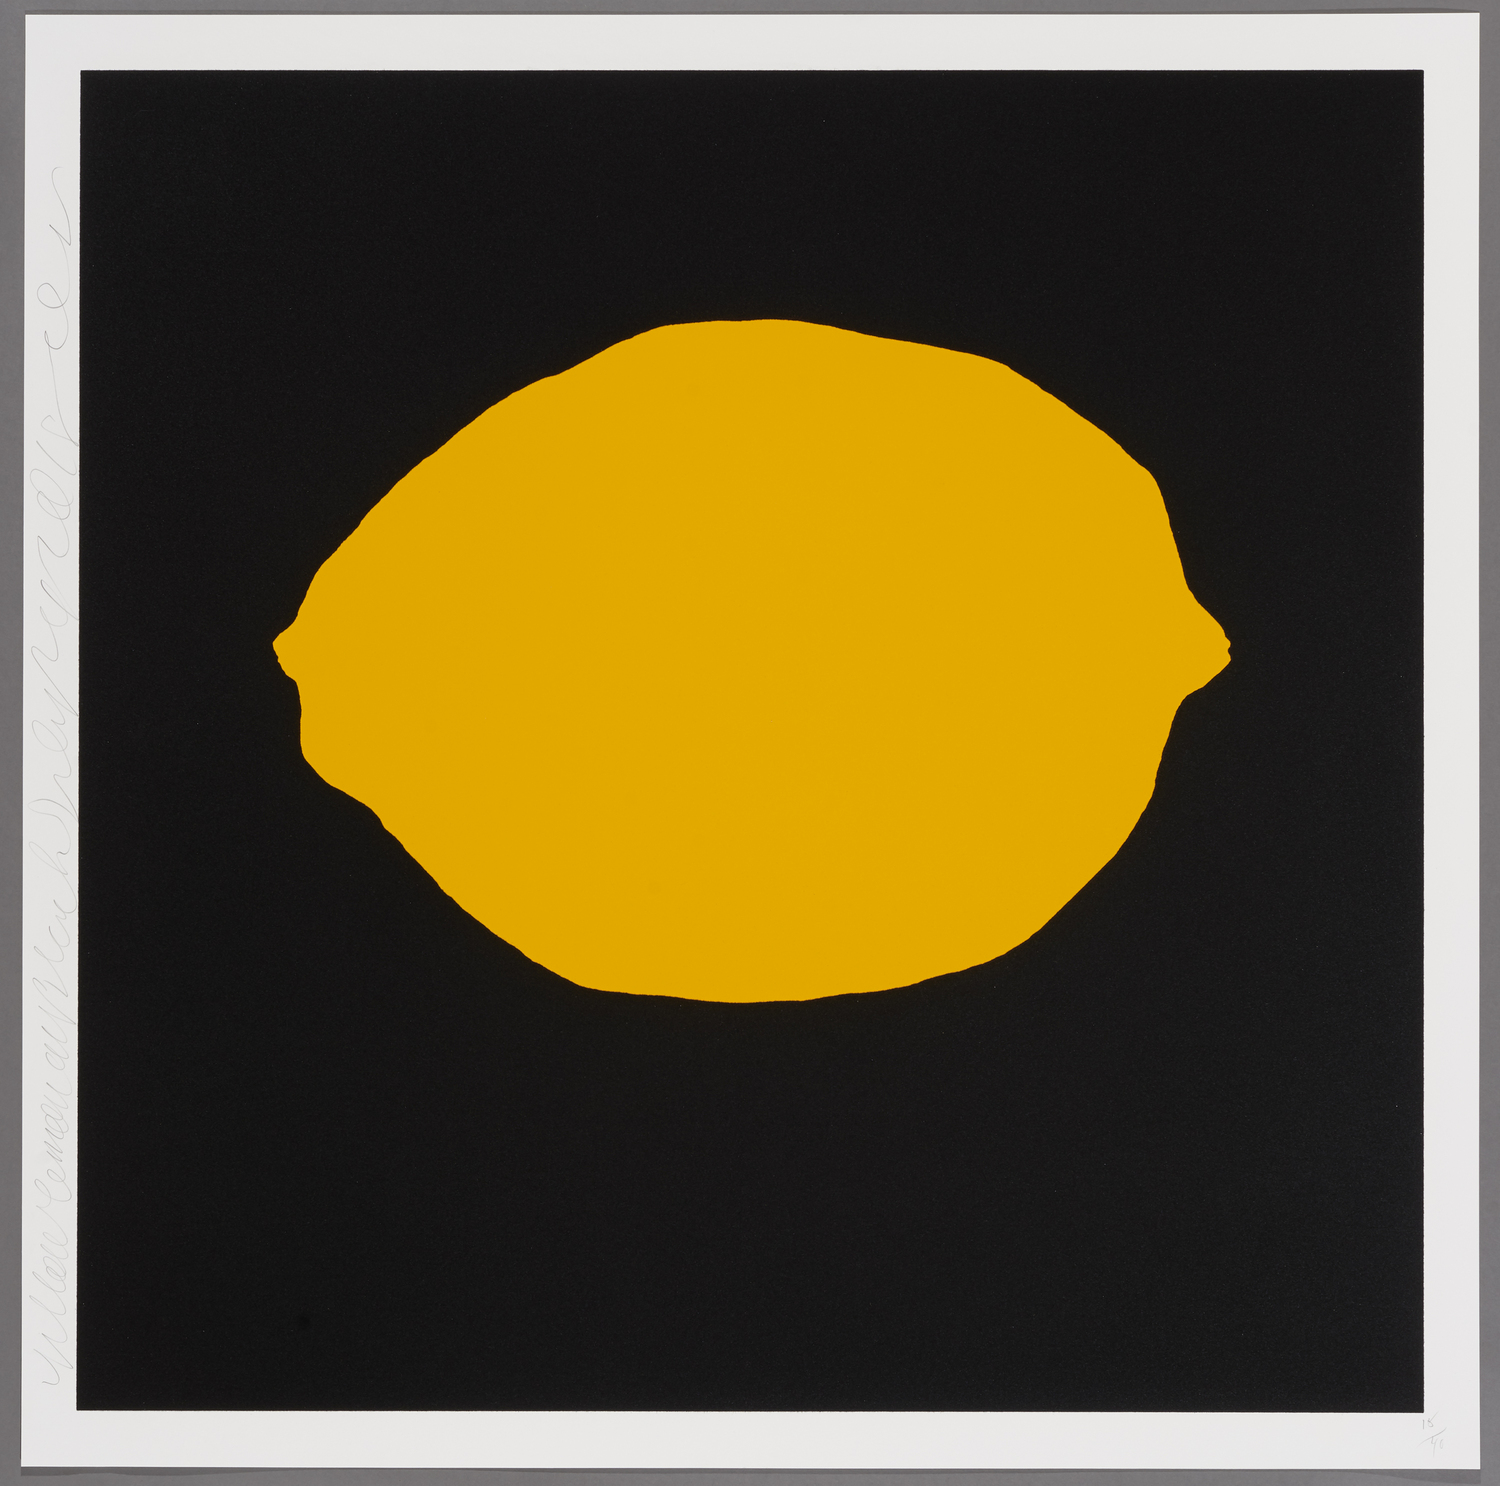 Donald Sultan (American (b. 1951))
Four Lemons: Yellow Lemon on Black, July 24, 2018, edition 15/40, 2018 
silkscreen with enamel ink and tar-like texture
39 x 39 in. Collection of Jordan D. Schnitzer
Image: Aaron Wessling Photography, Courtesy of Jordan Schnitzer Family Foundation